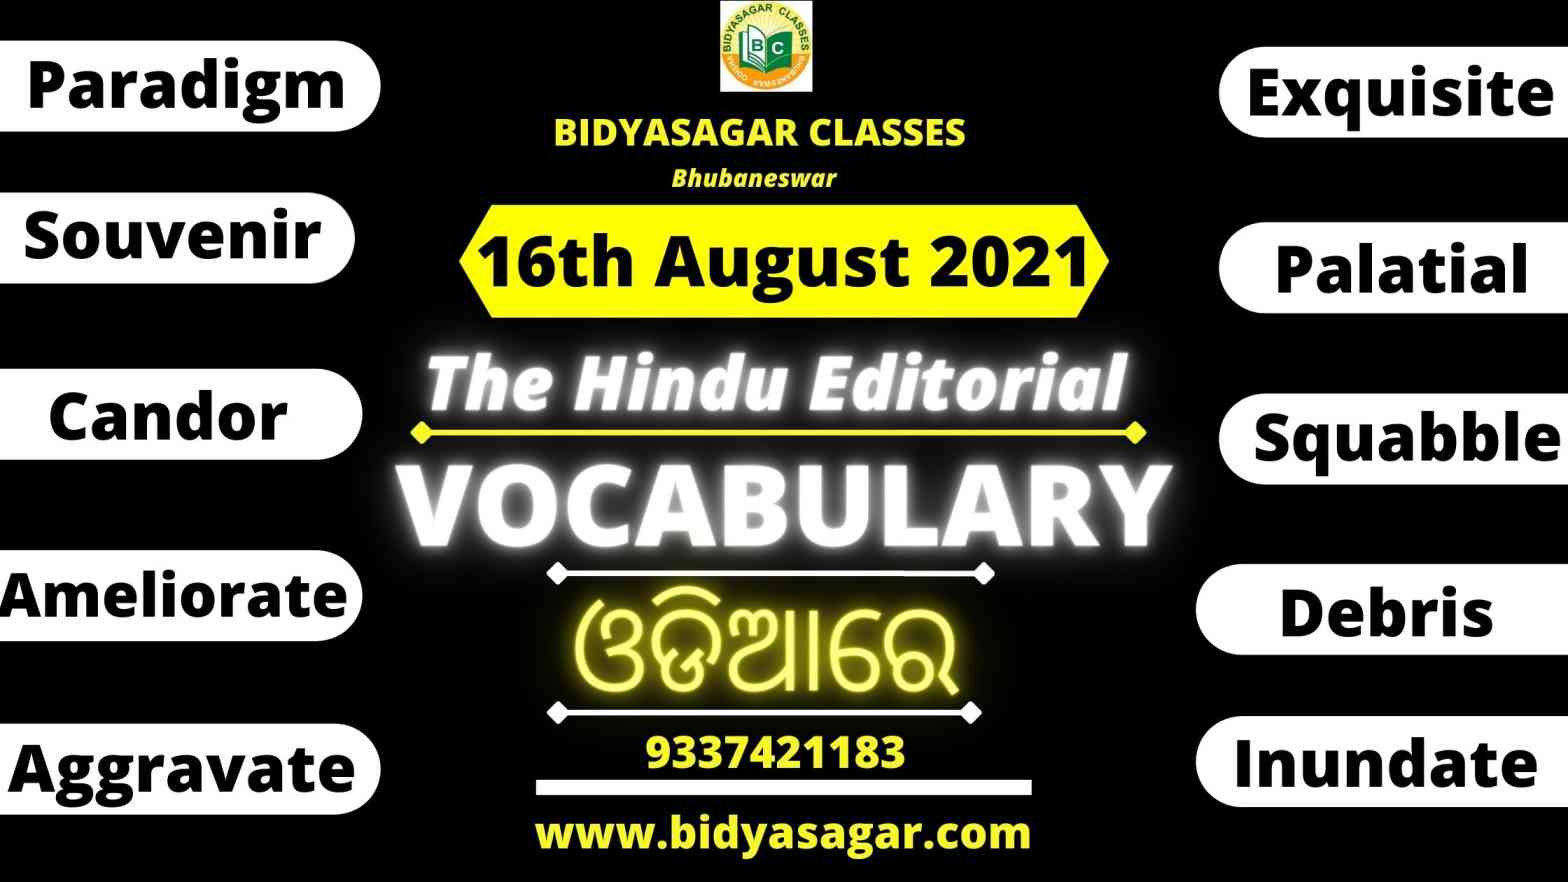 The Hindu Editorial Vocabulary of 16th August 2021